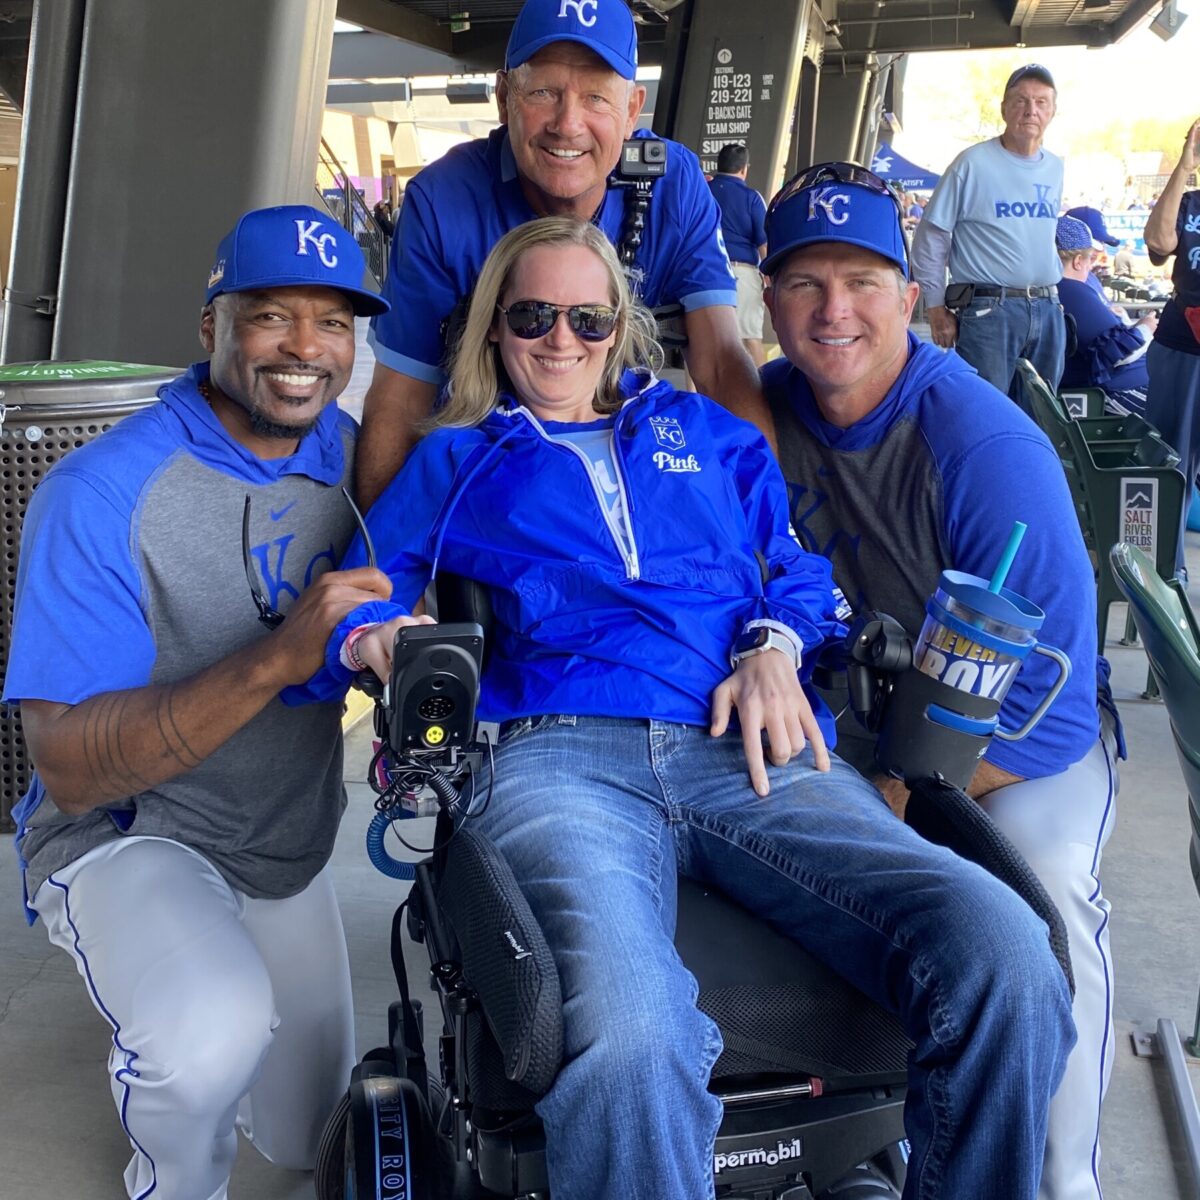 A New Season of Family Memories with the Kansas City Royals